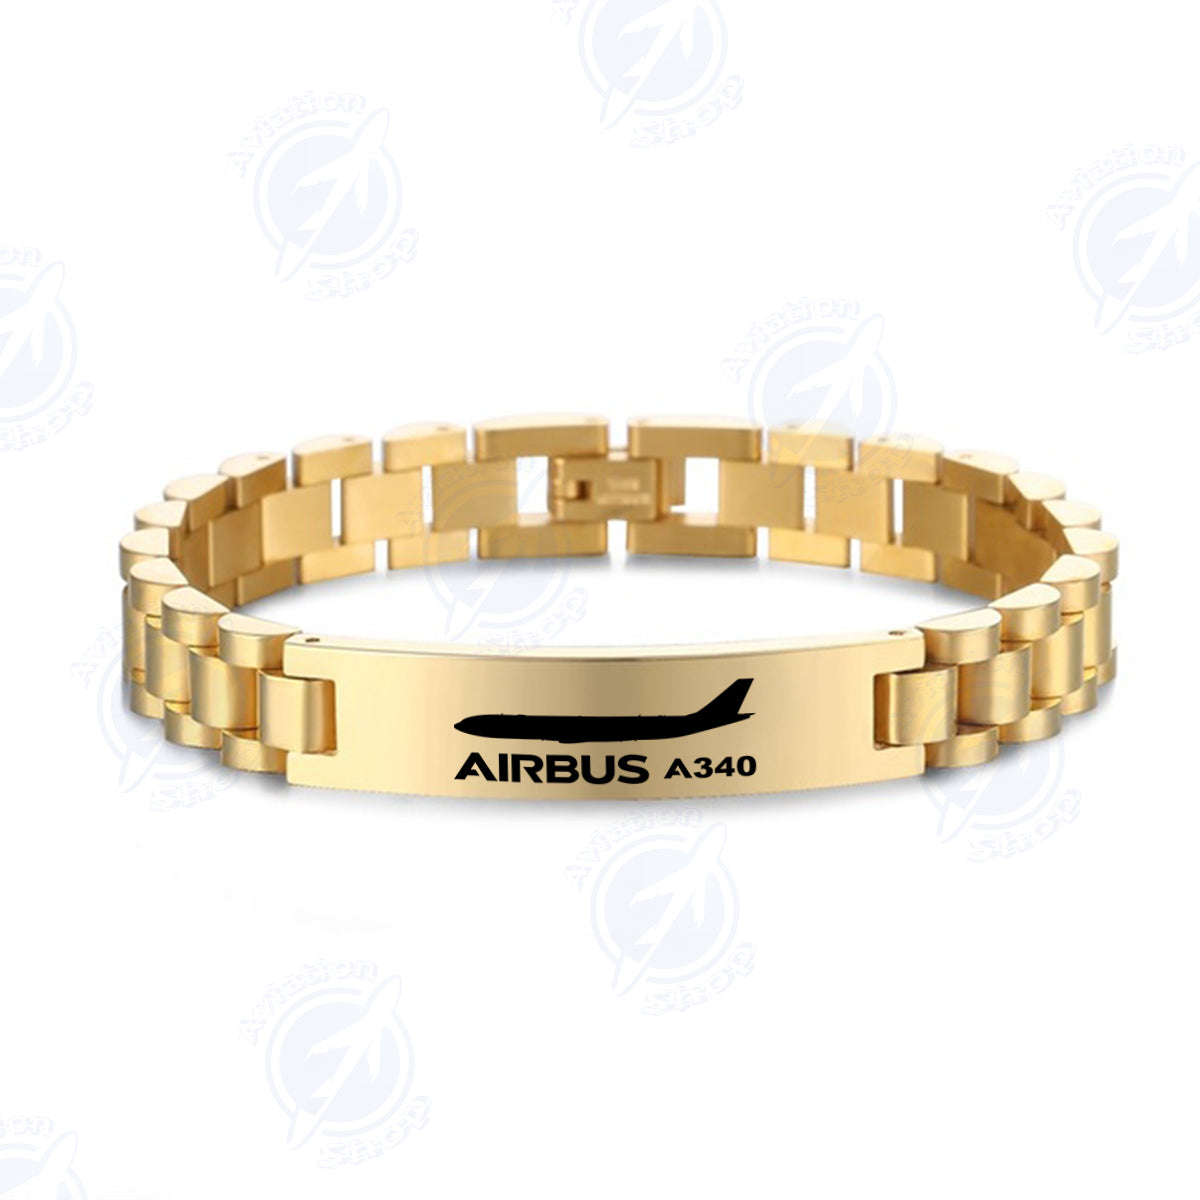 The Airbus A340 Designed Stainless Steel Chain Bracelets